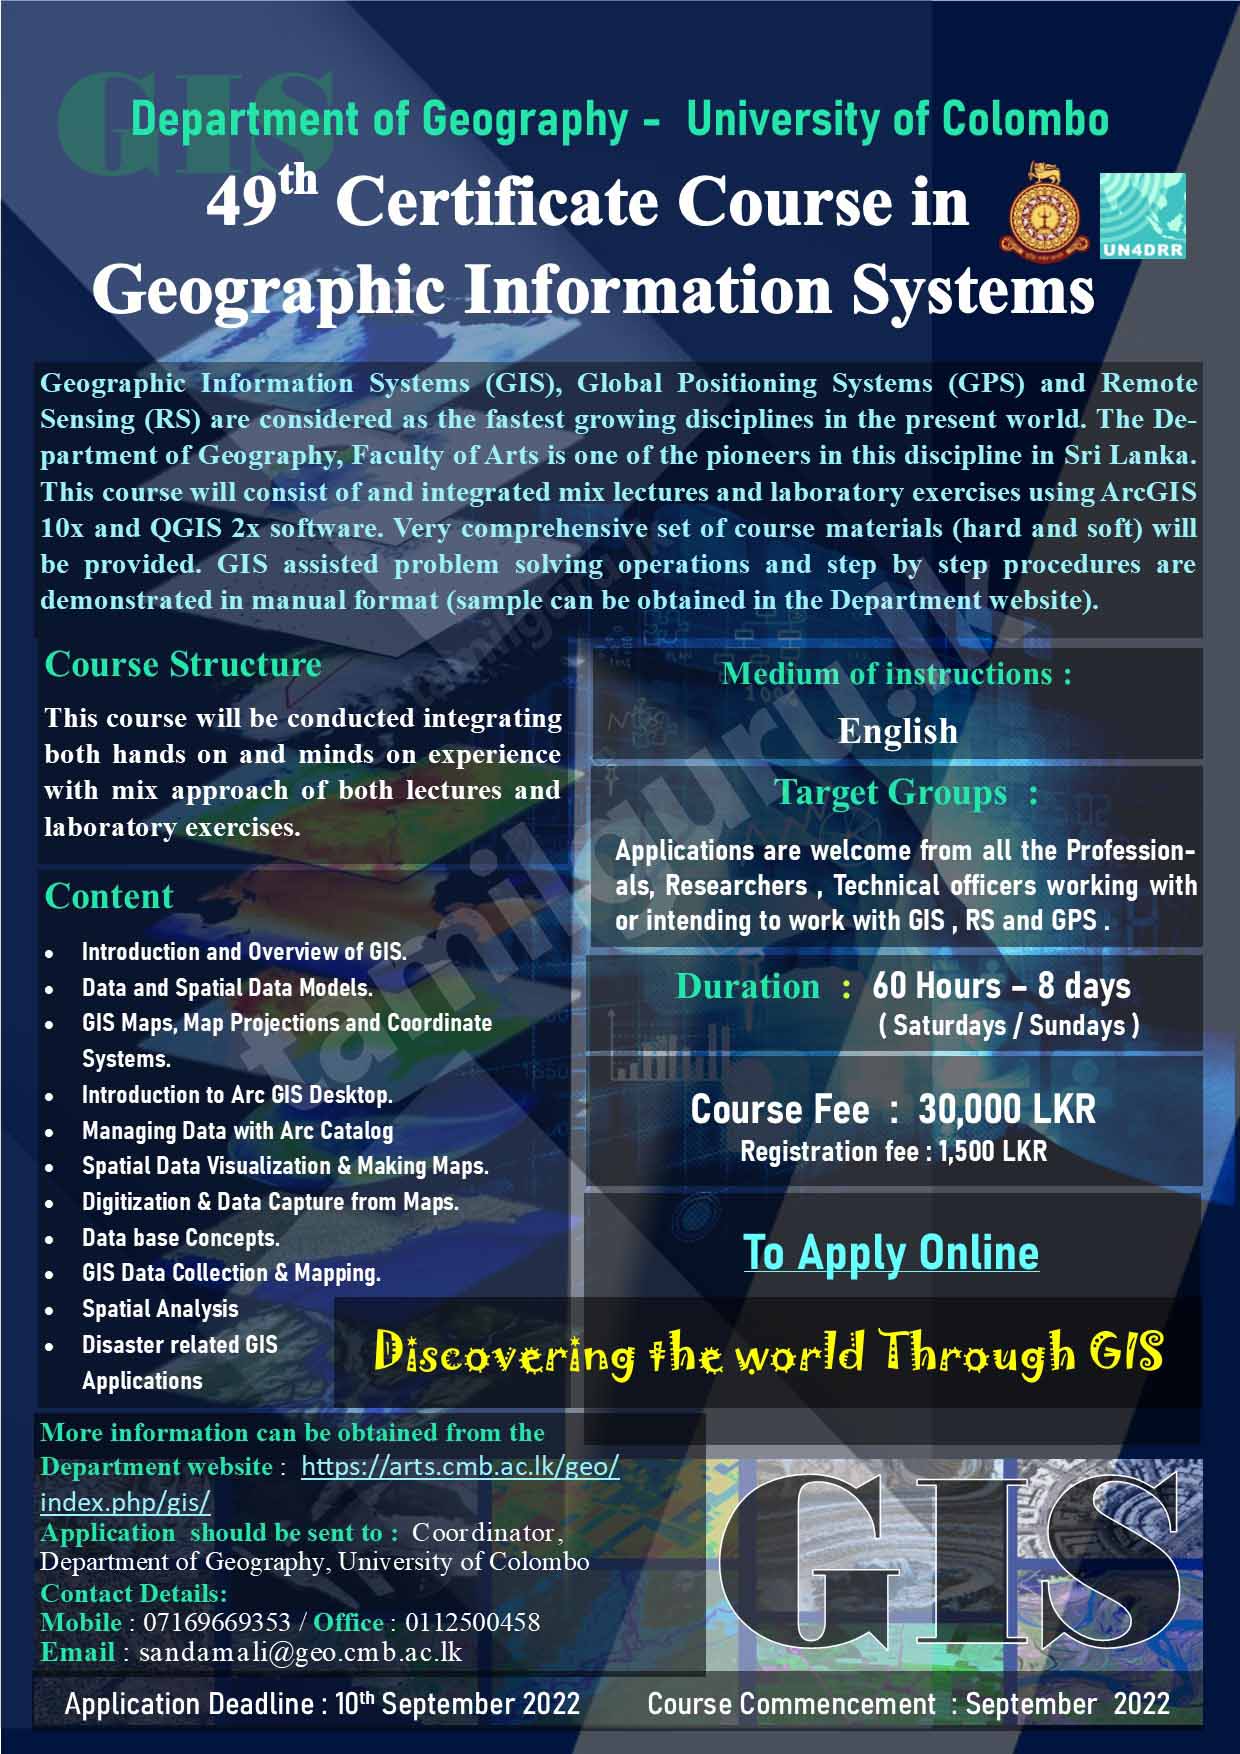 Calling for Applications - Certificate Course in Geographical Information Systems (GIS) 2022 - University of Colombo